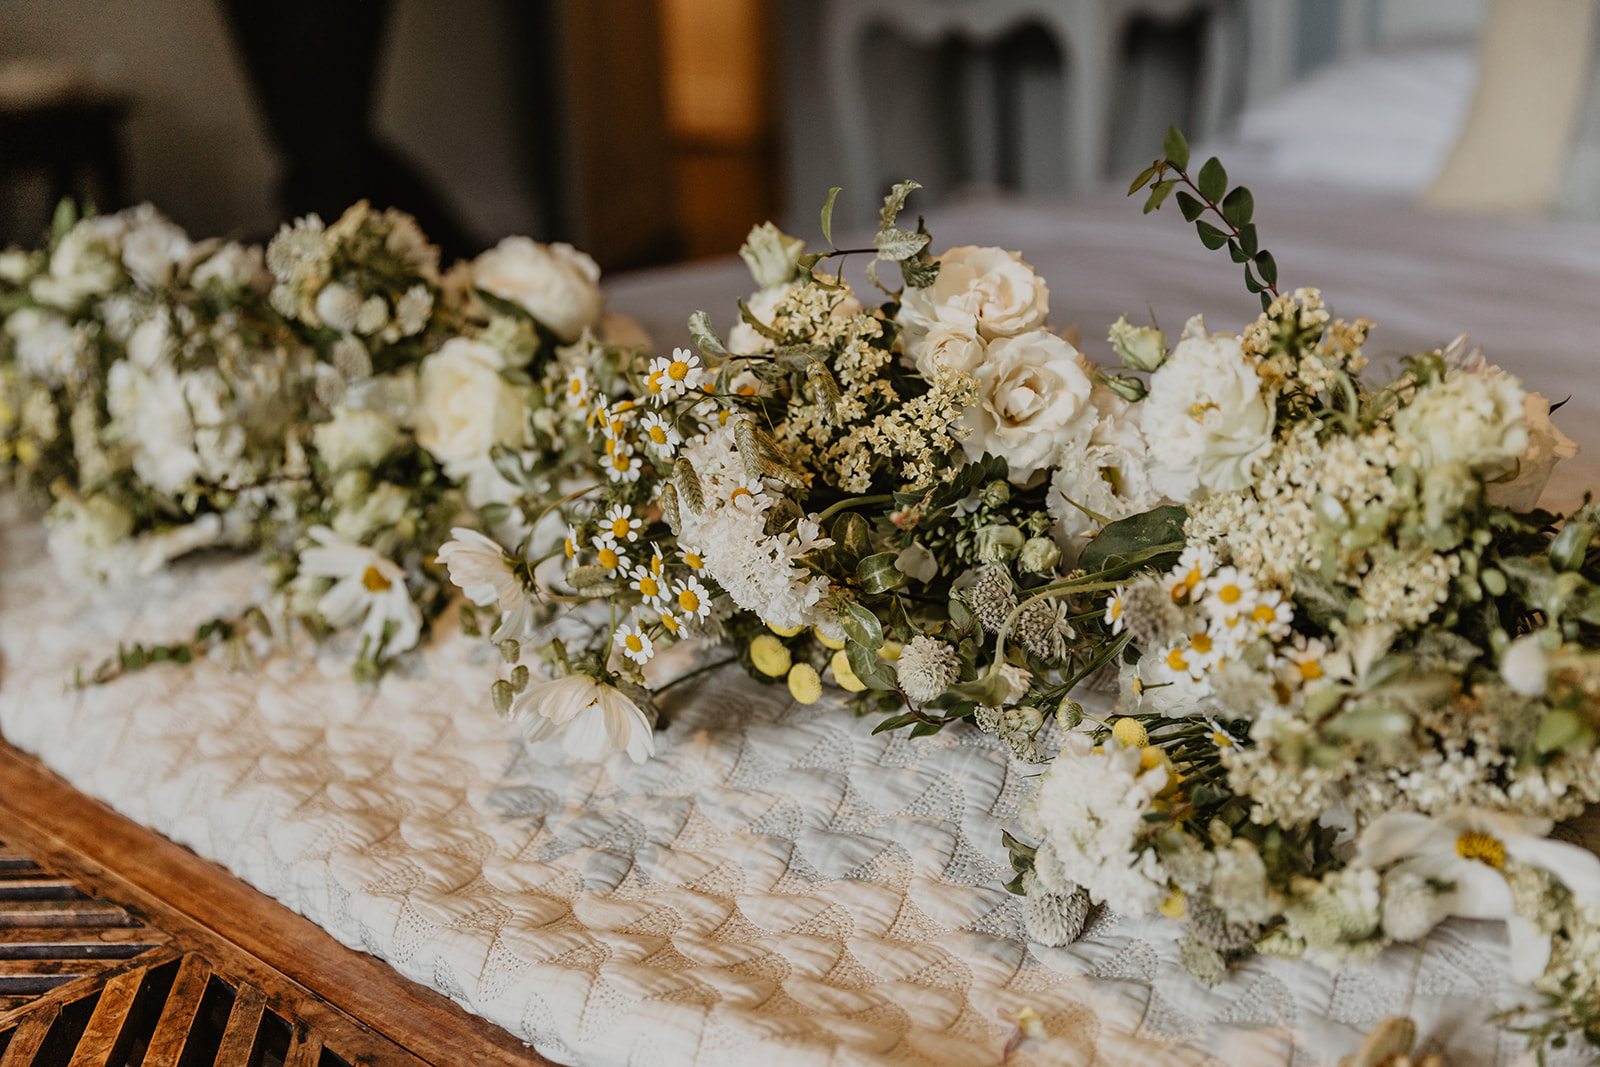 Flower arrangements at a Great Tythe Barn Wedding, Cotswolds. By Olive Joy Photography.